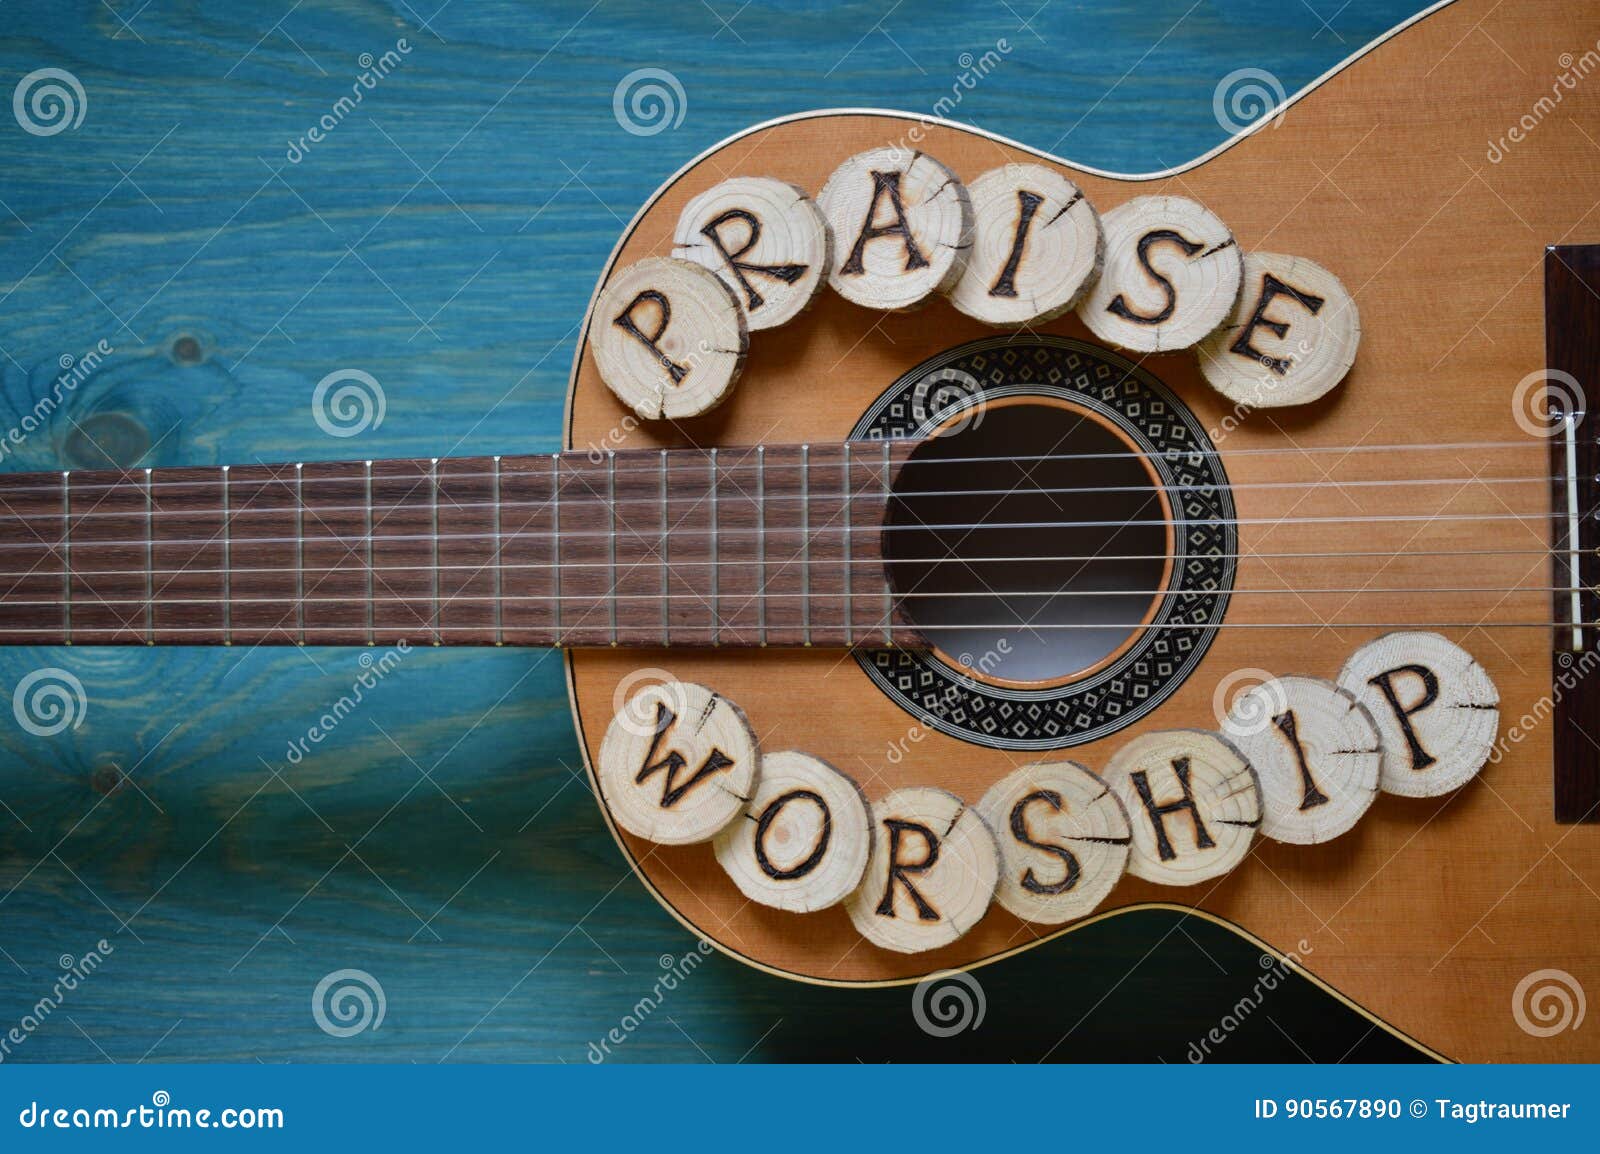 guitar on wood with words: praise and worship